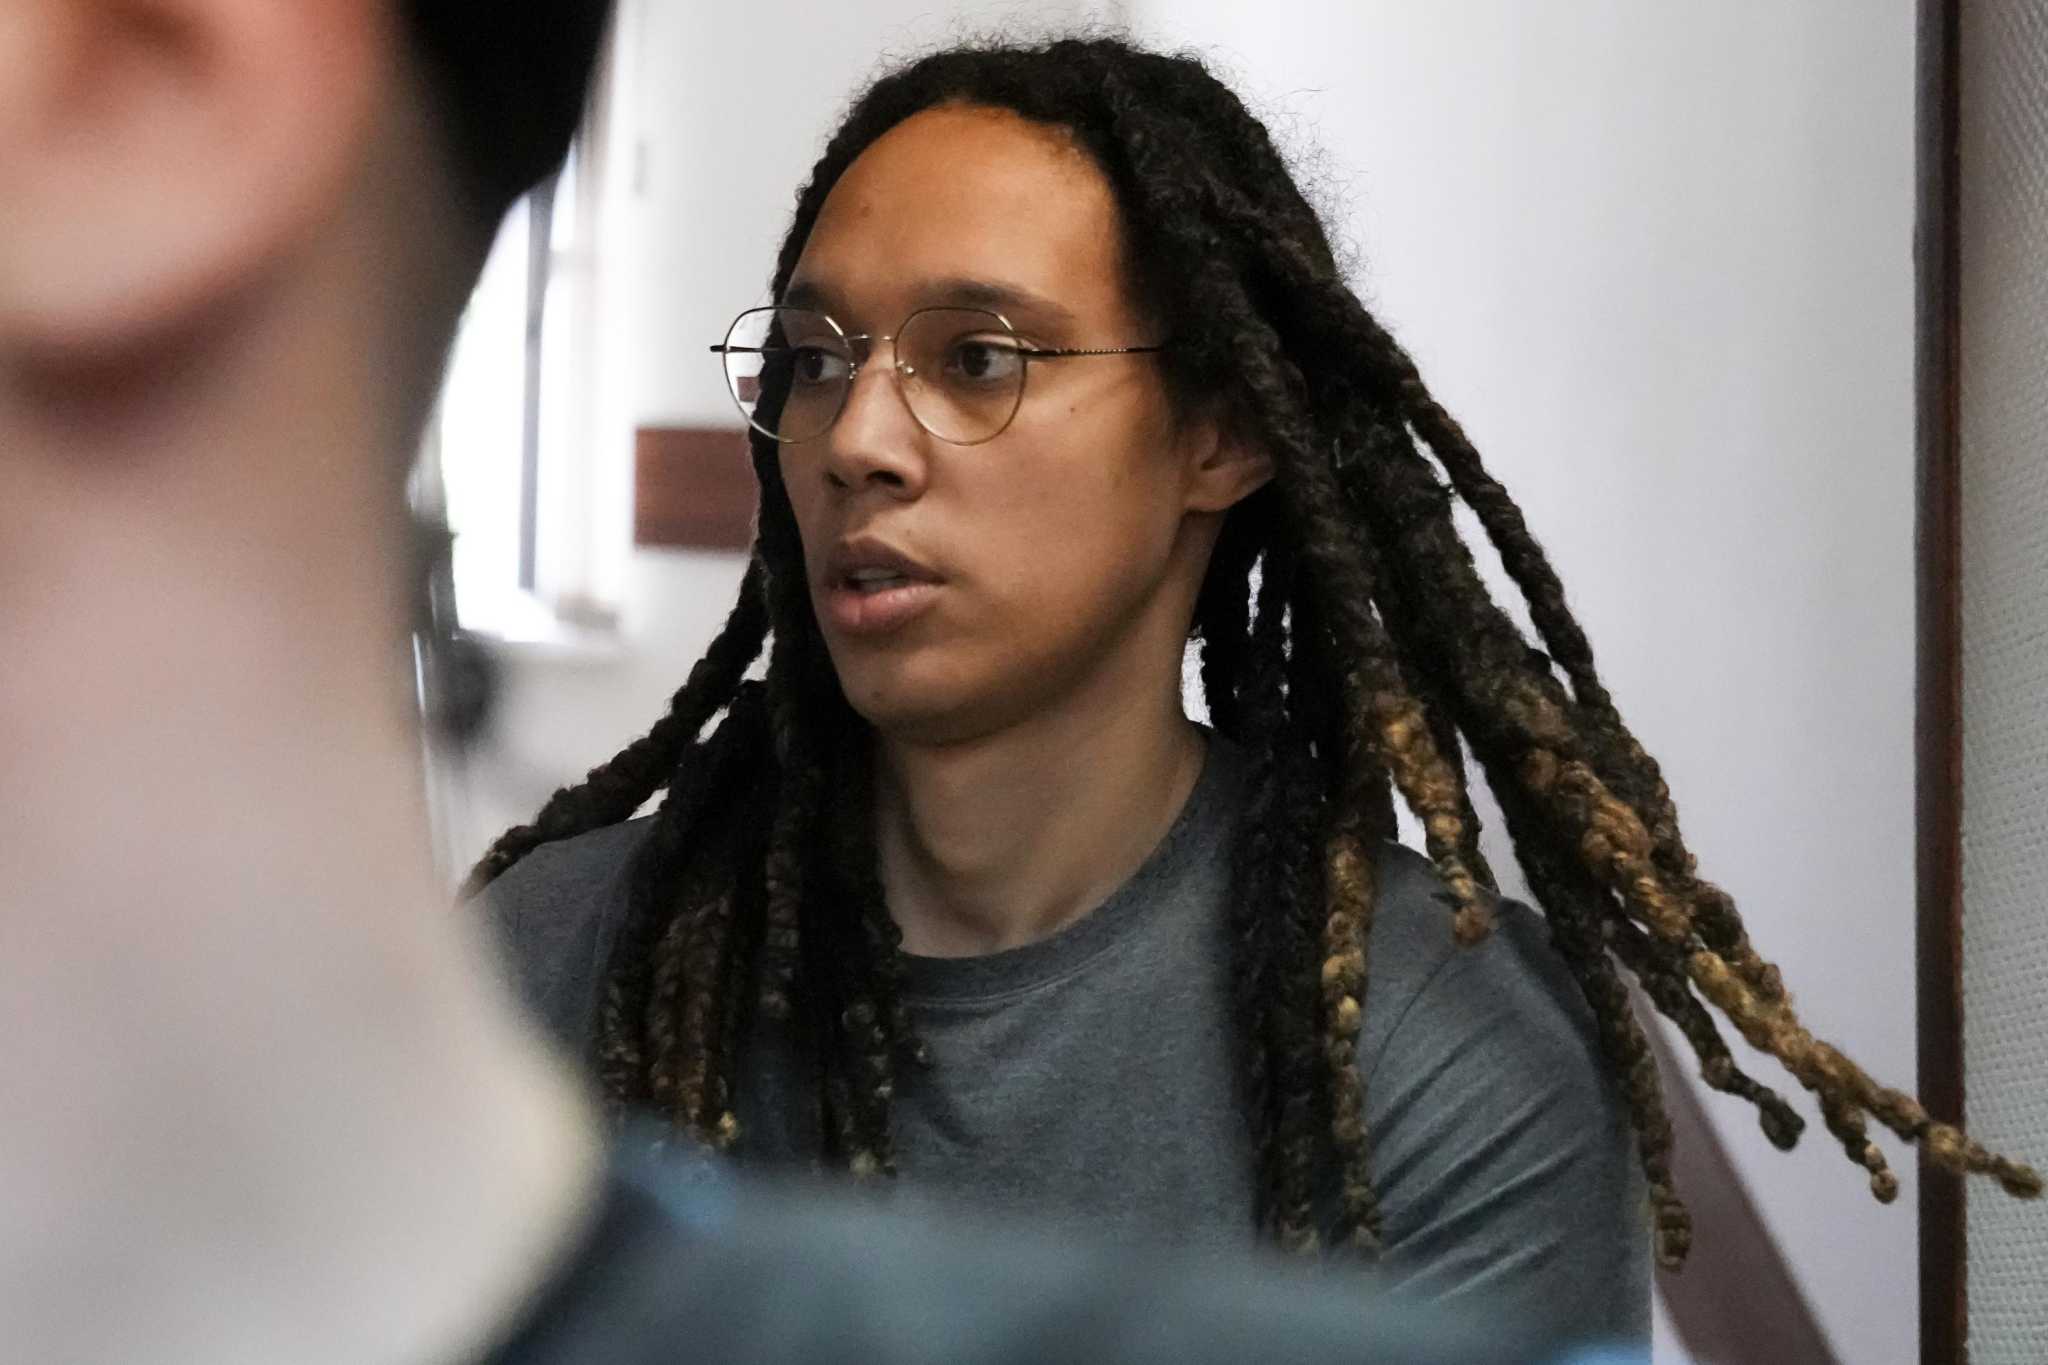 WNBA star Brittney Griner stands trial in Russia on drug charge